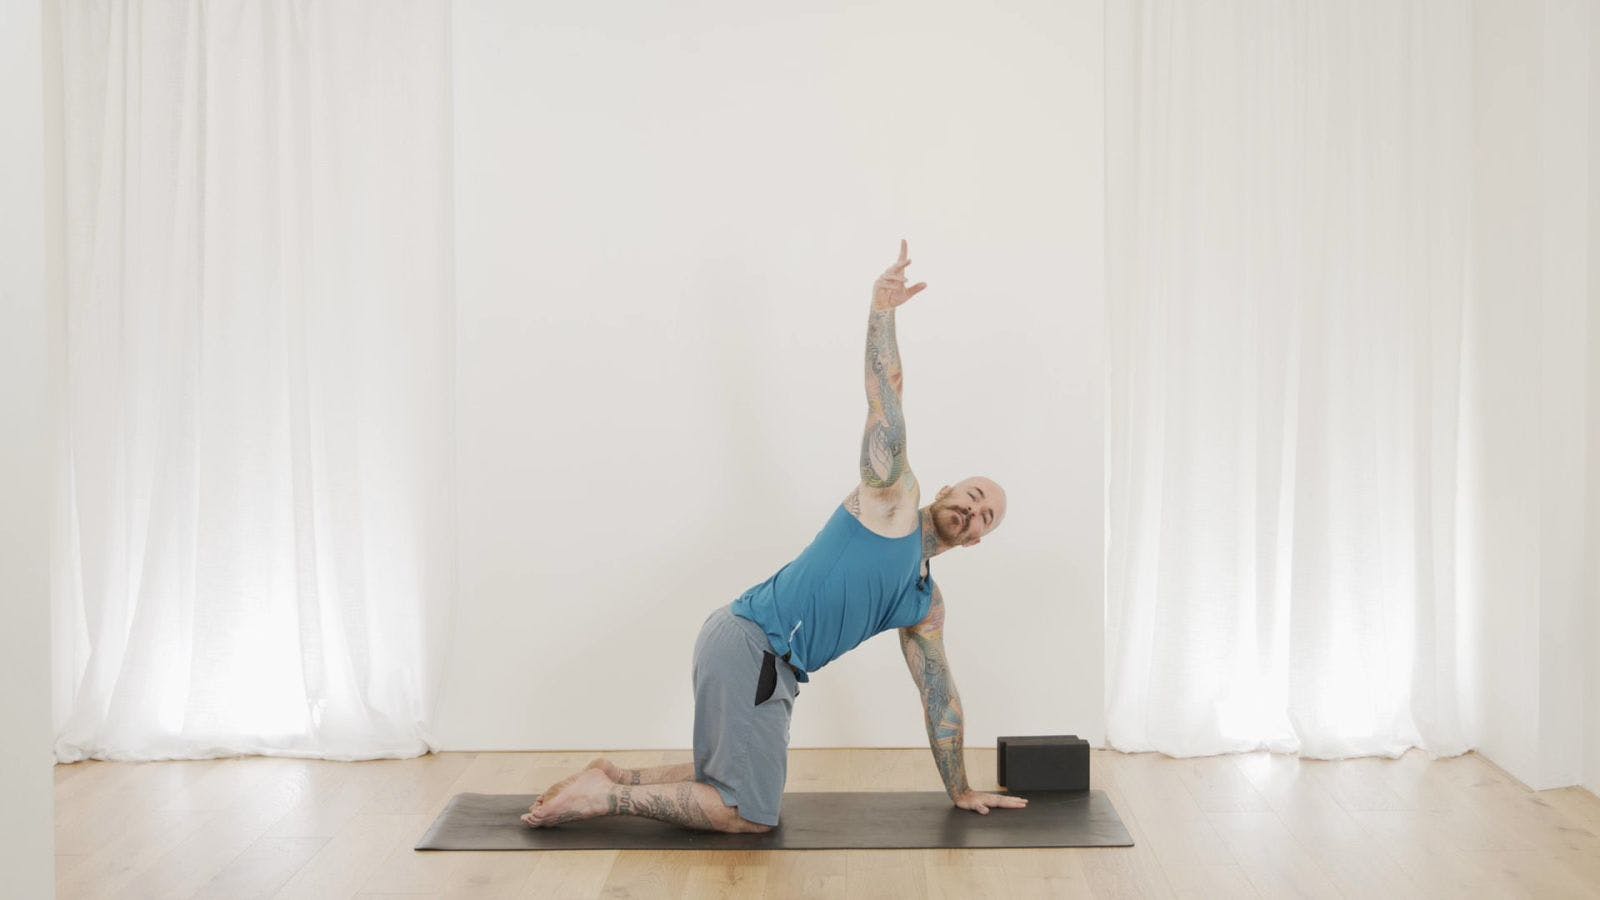 Yoga Foundations - Finding Your Breath with Ari Levanael